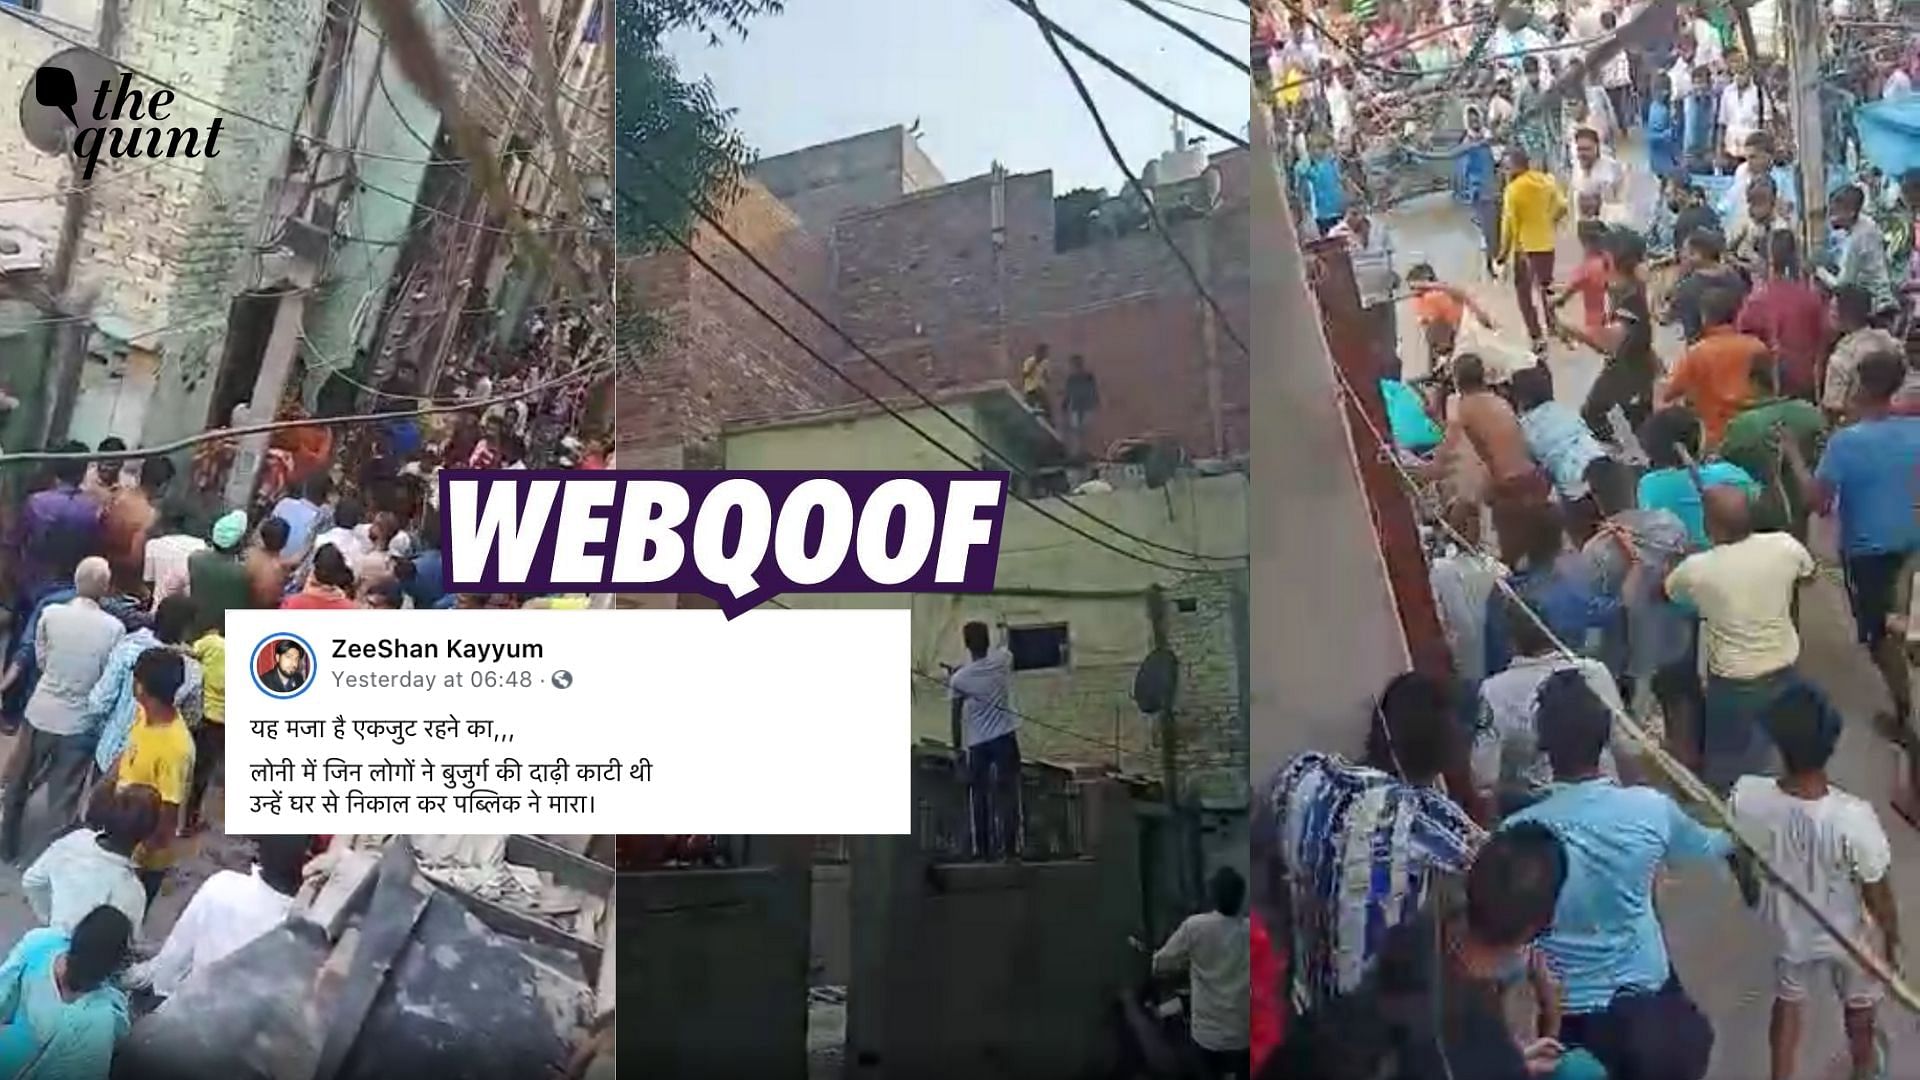 We found that the video is from Delhi’s Jahangirpuri where a group of people thrashed three men who had allegedly come to extort money from a vegetable seller.